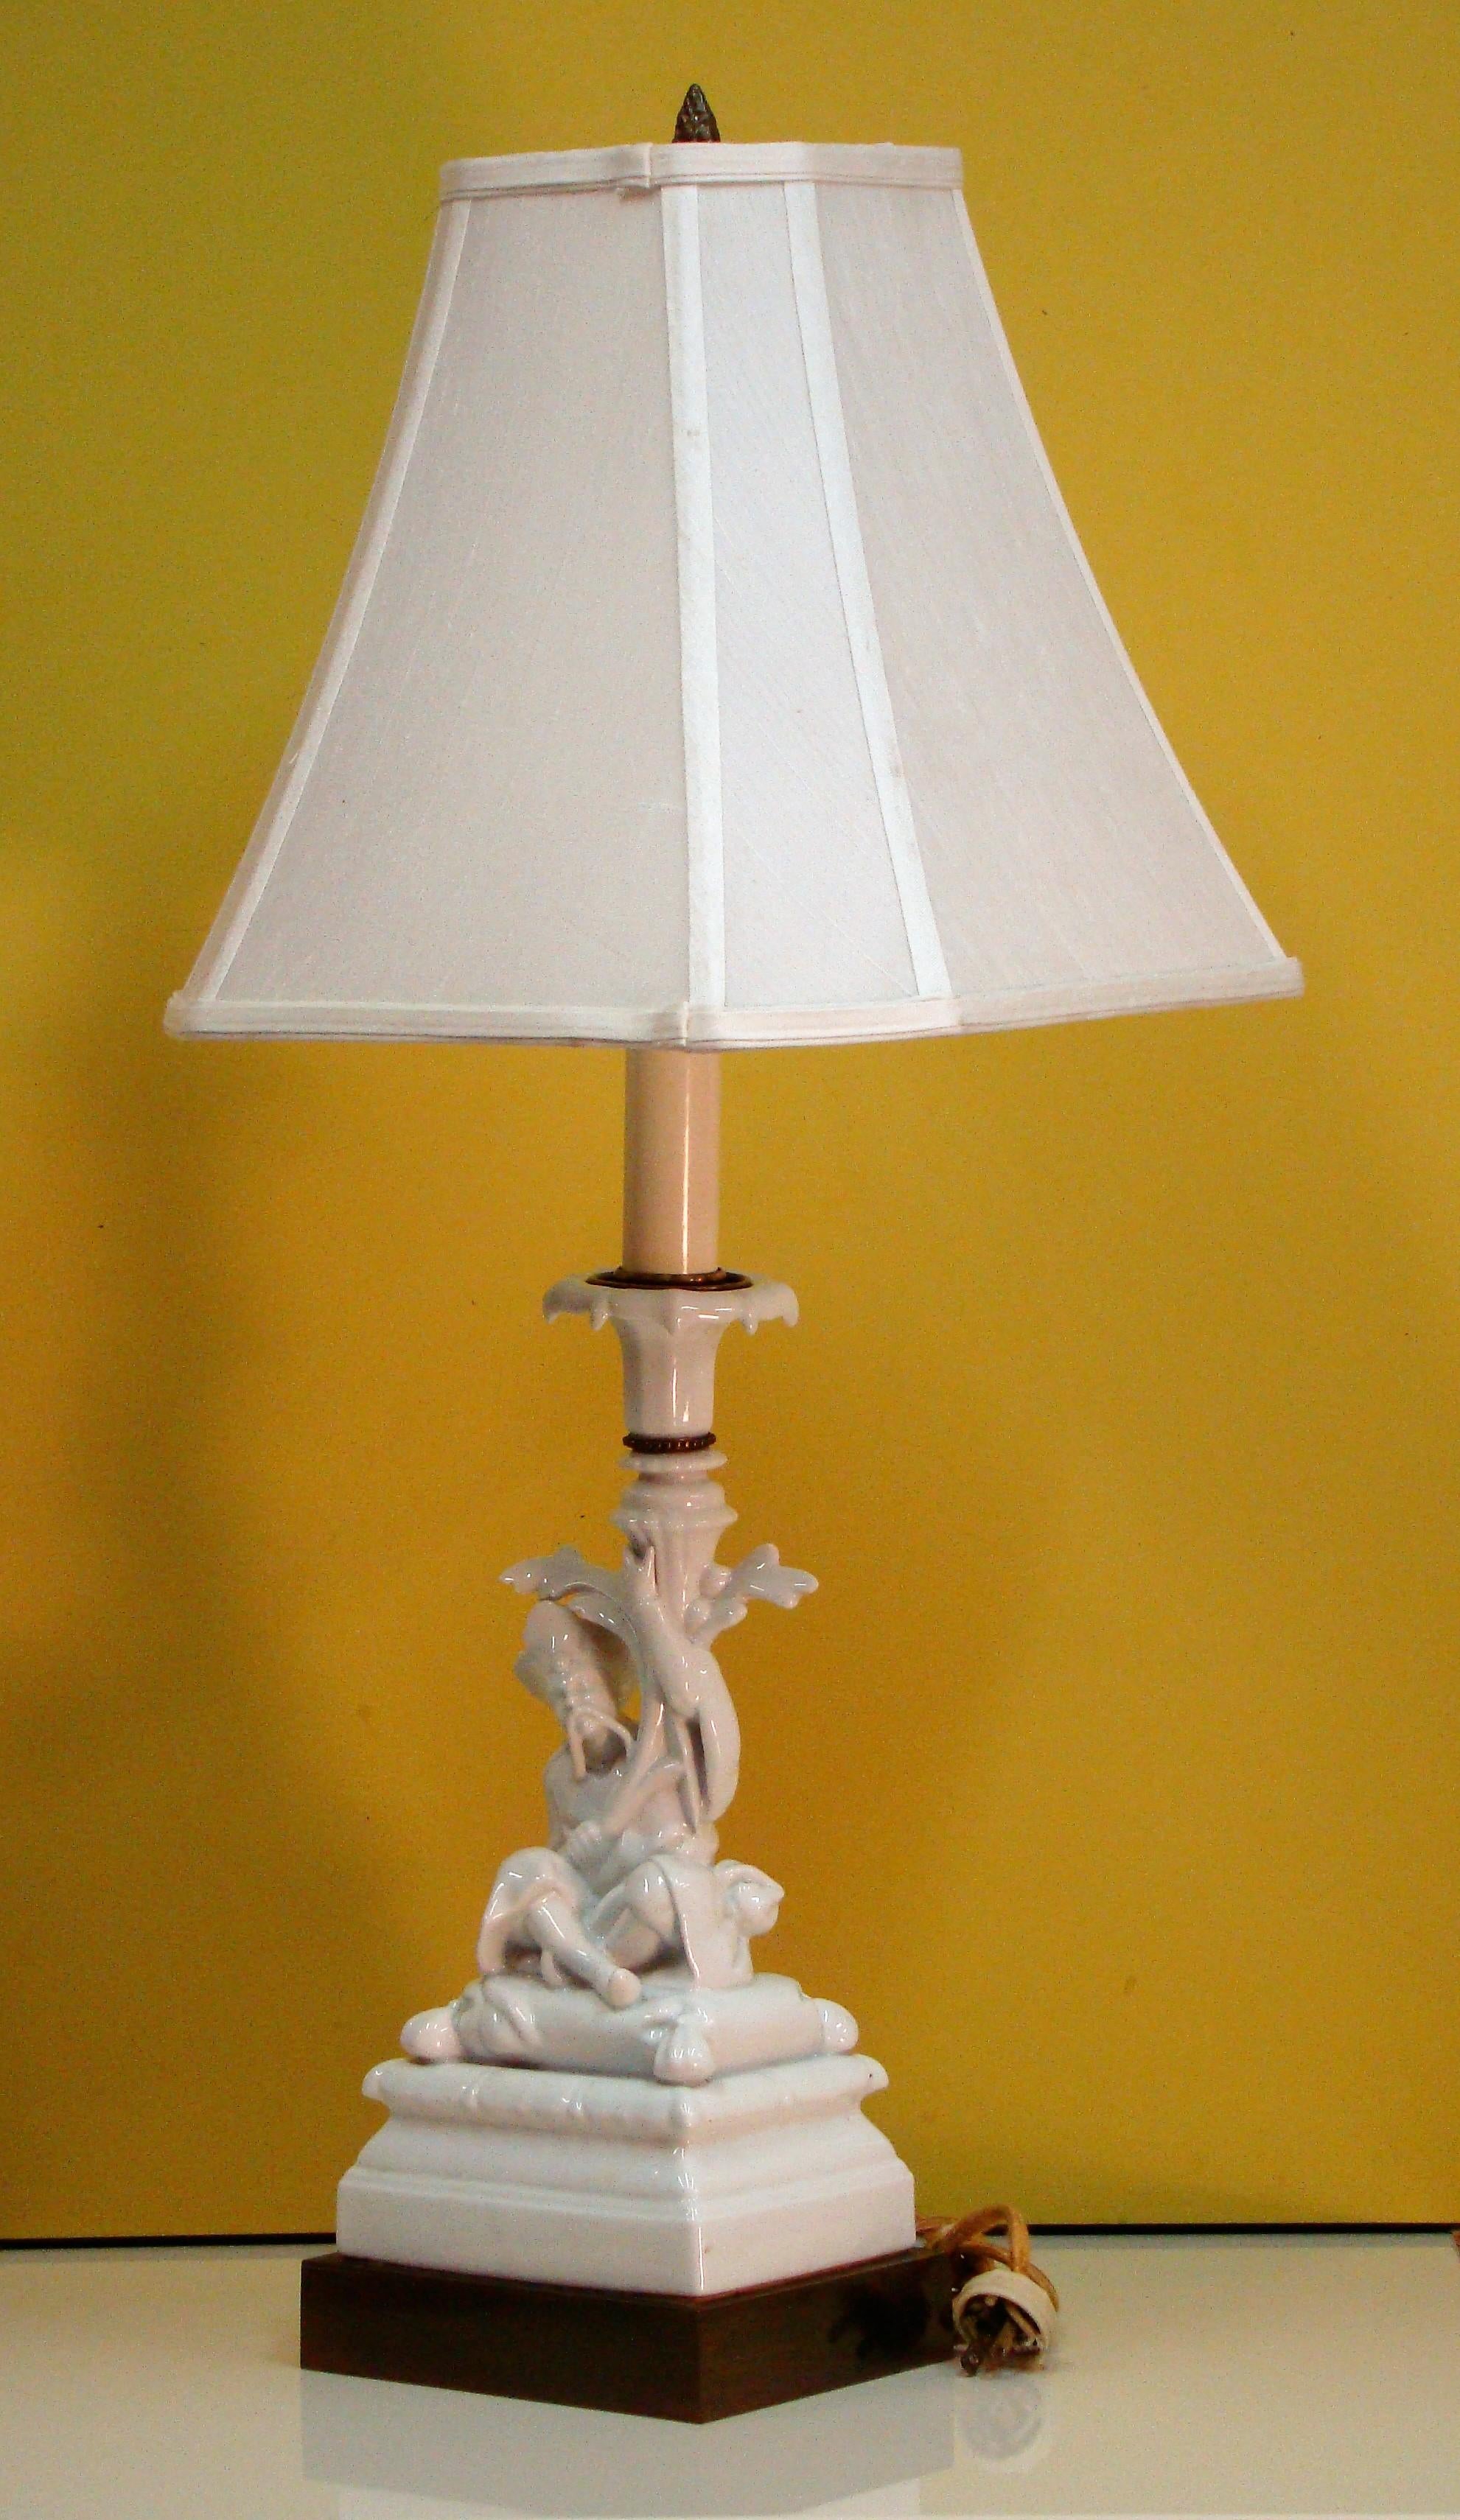 White Porcelain Chinoiserie Table Lamp by Paul Hanson 1950's For Sale 2